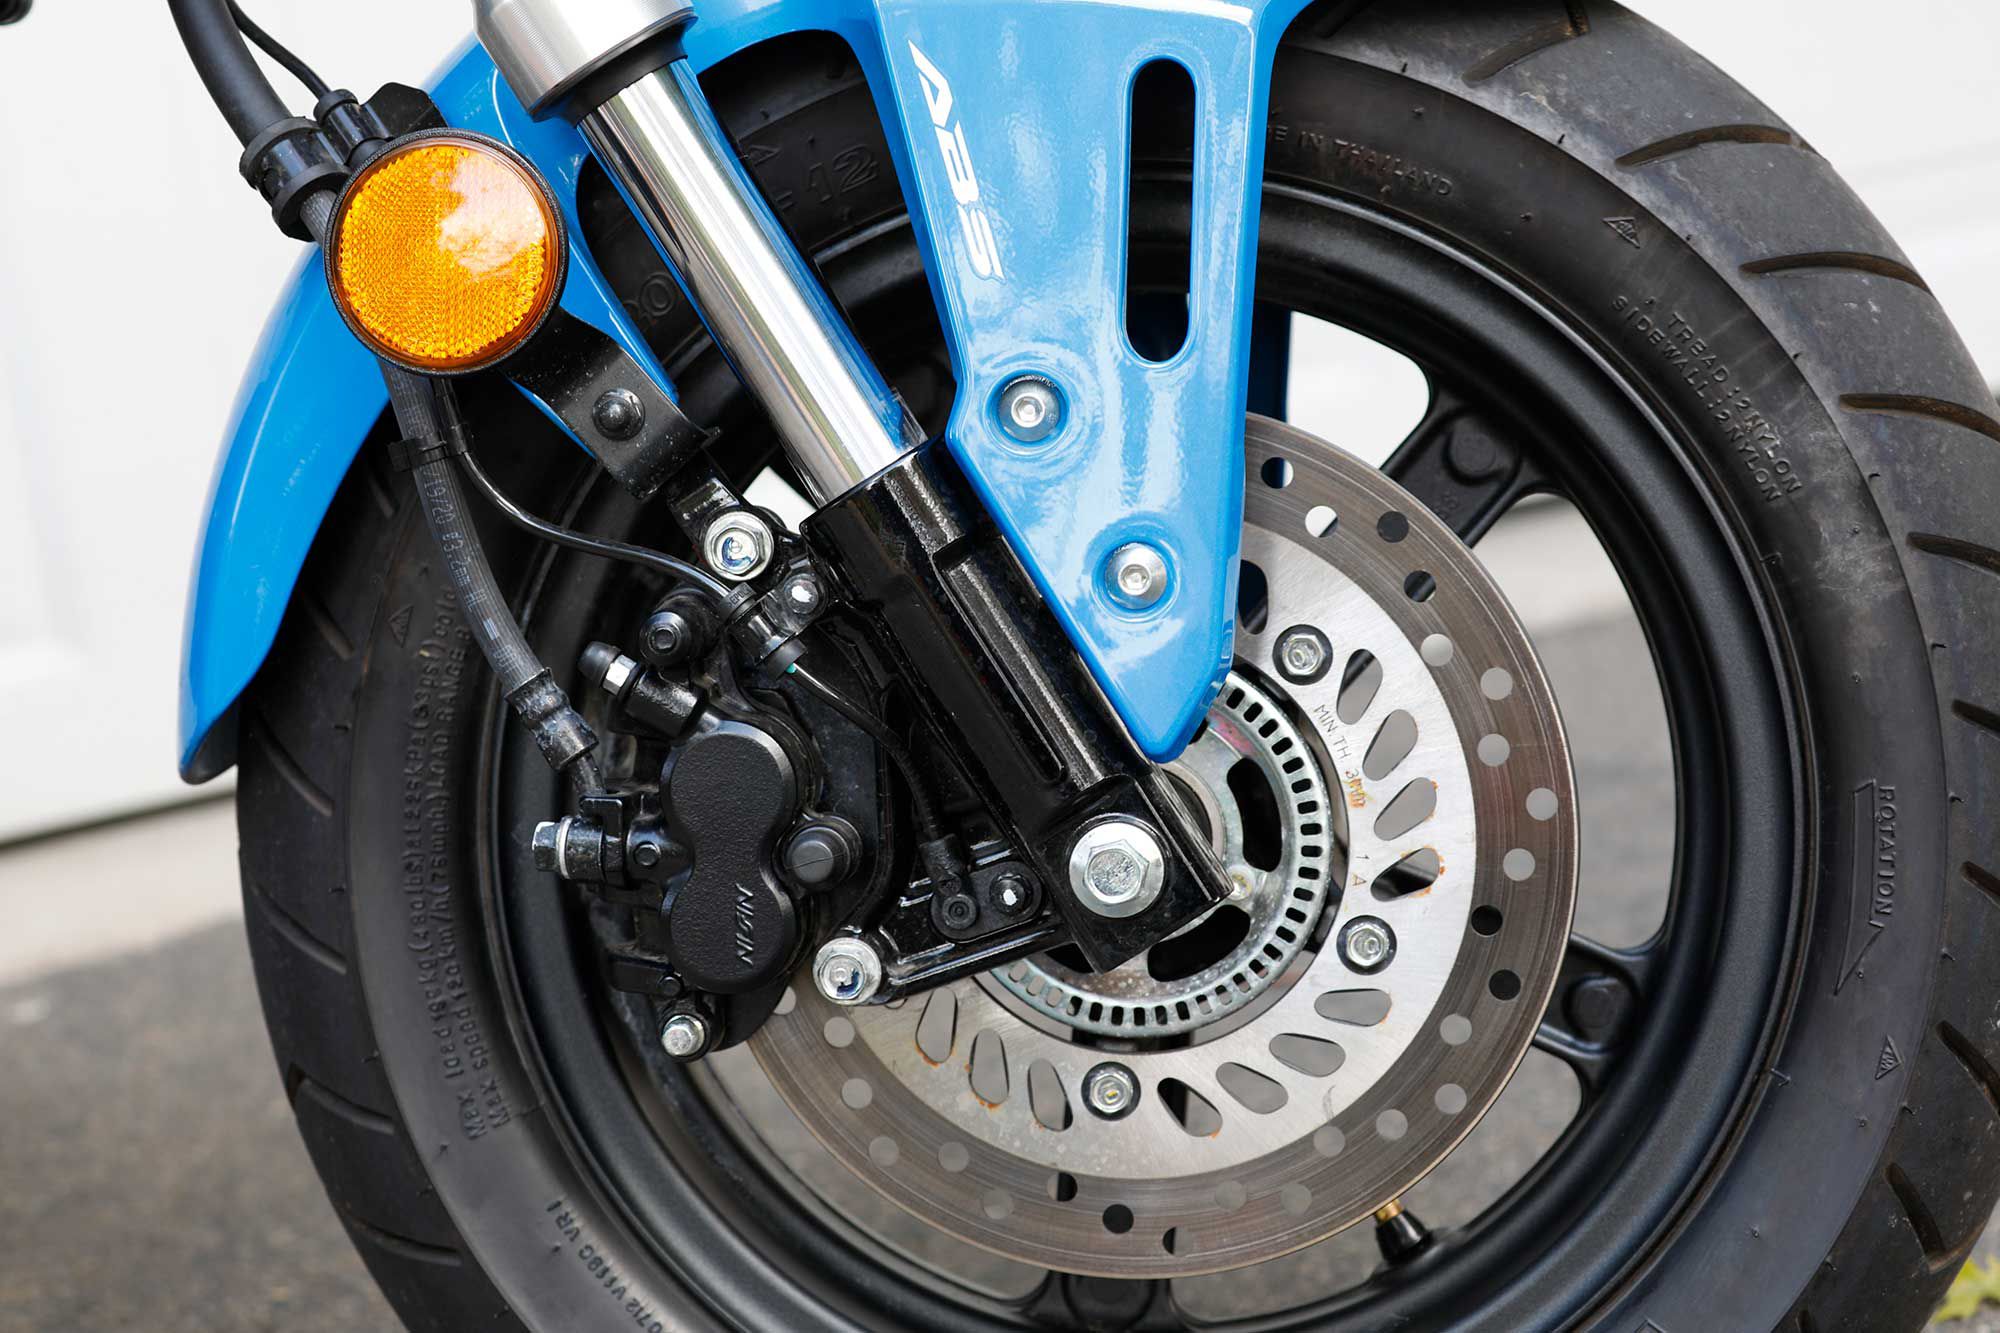 We appreciate the added stopping power courtesy of the double-piston front brake caliper.